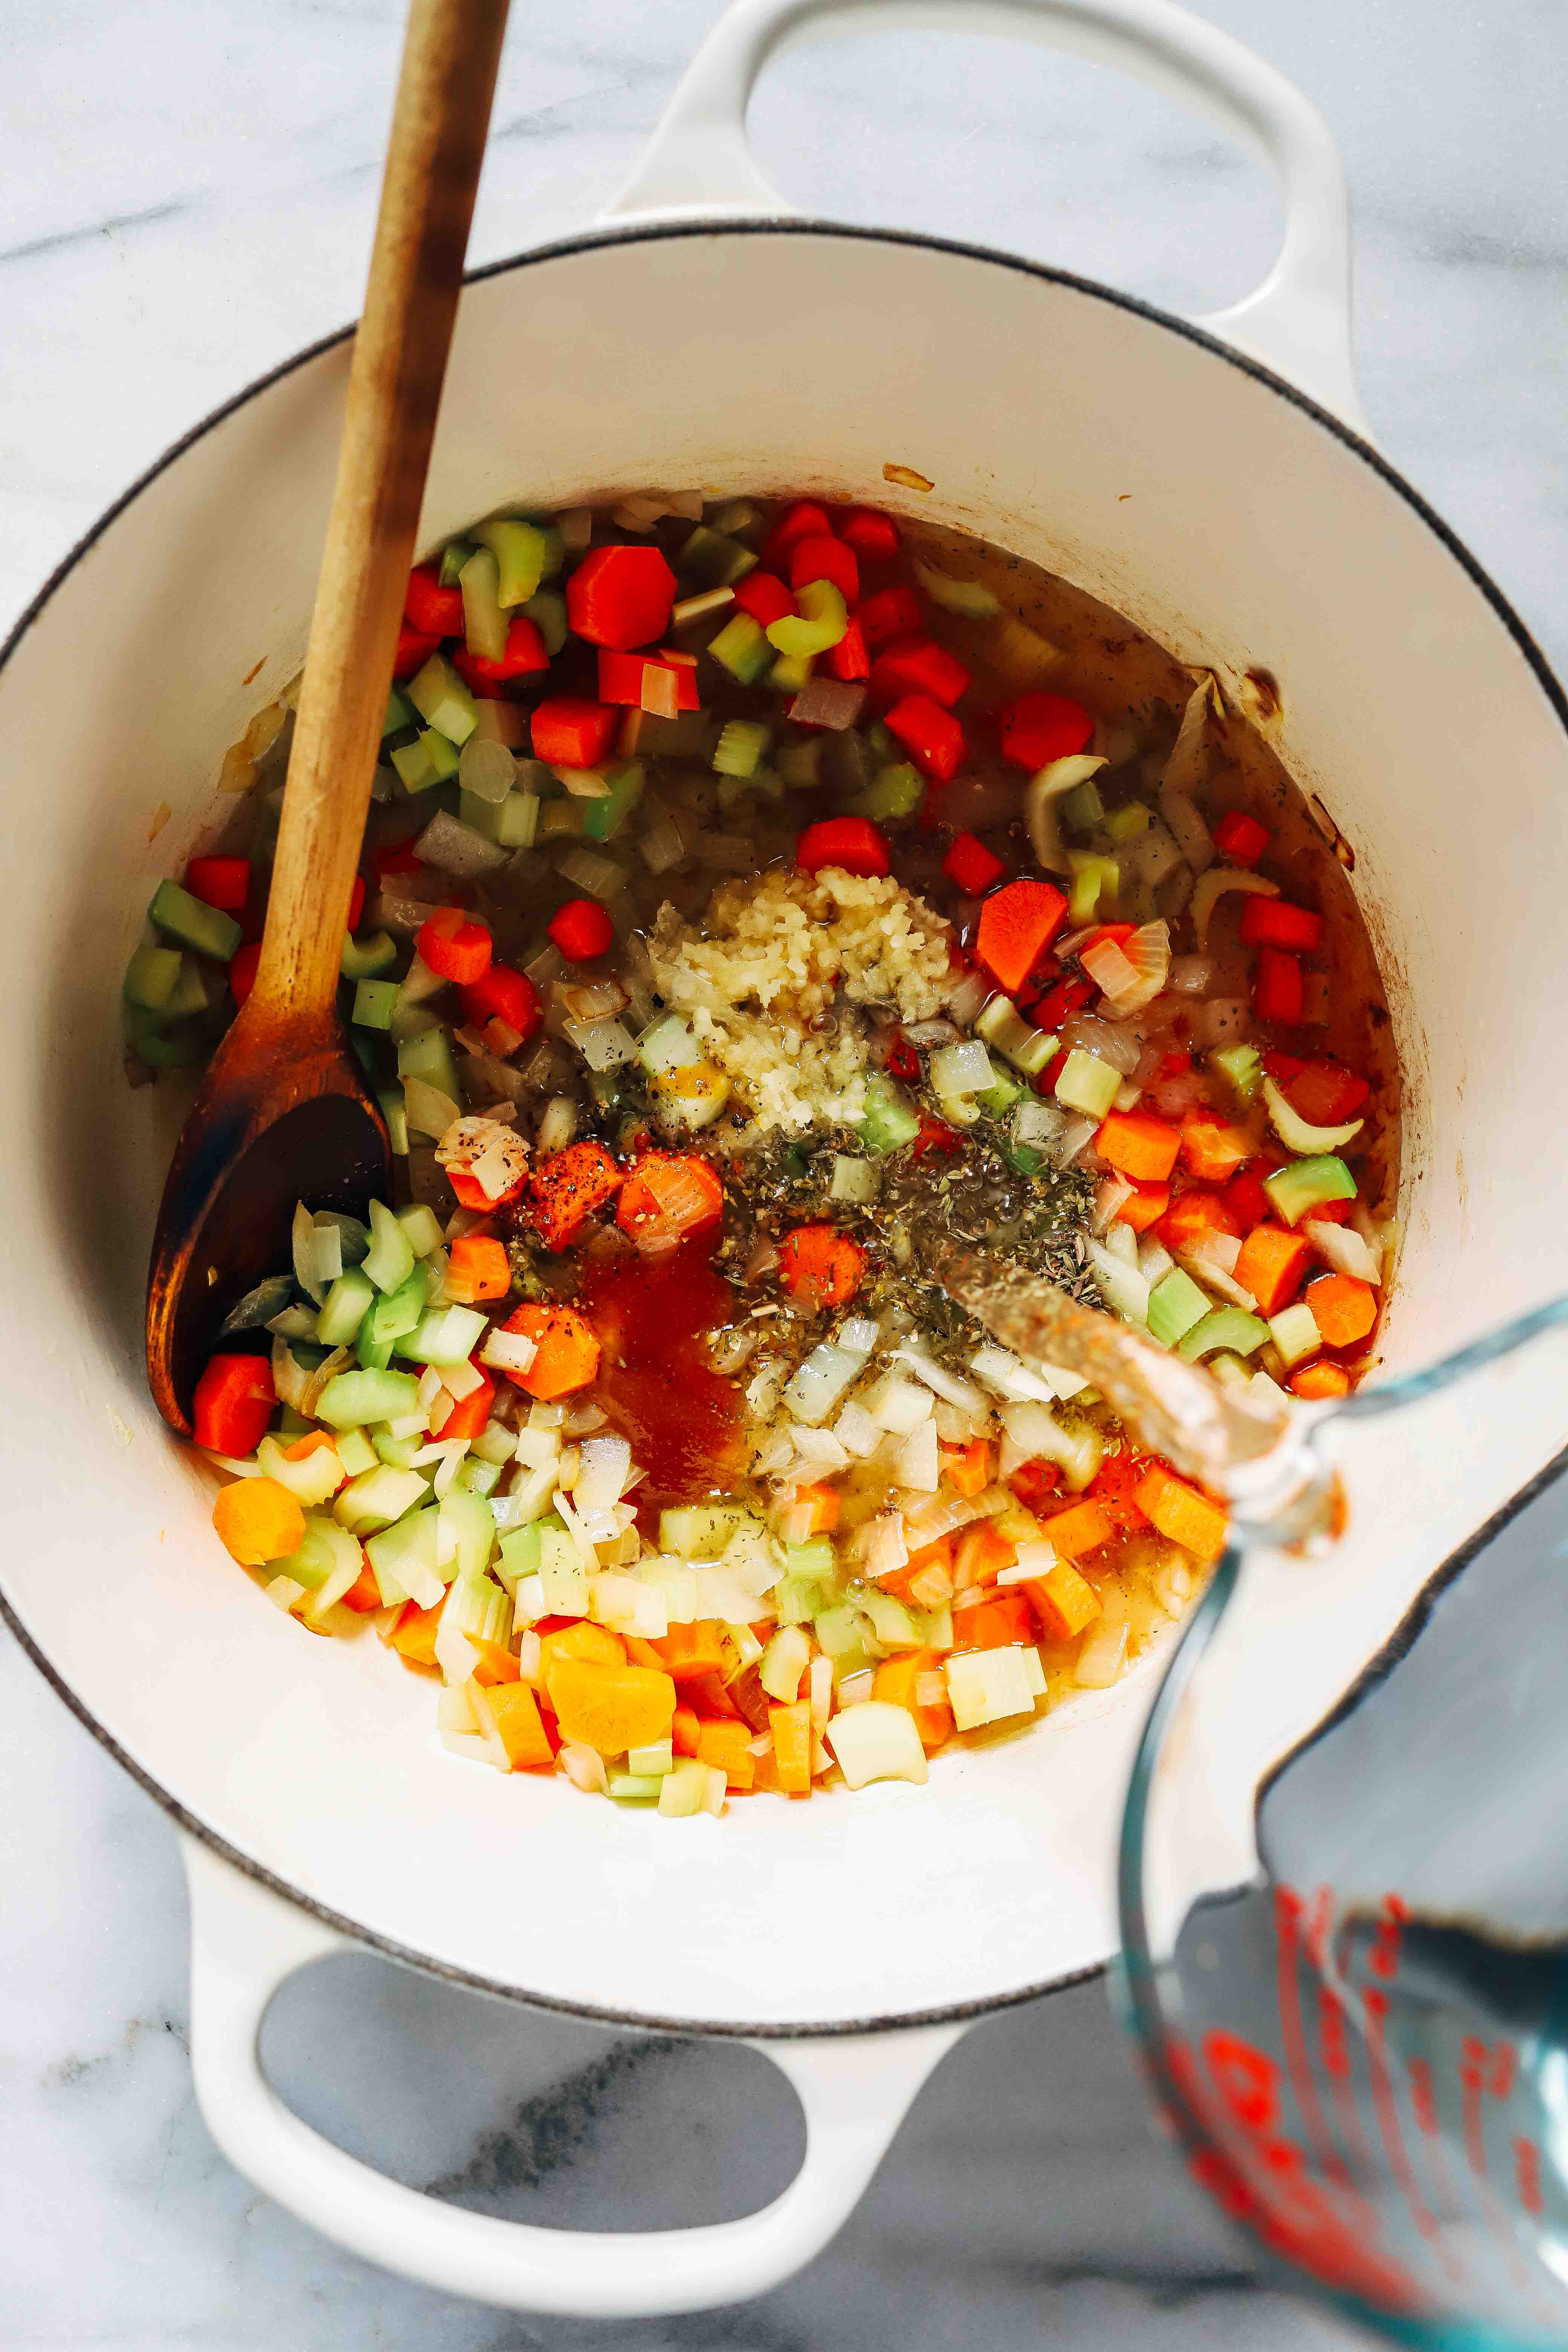 Tofu 'Chicken' Noodle Soup- packed with flavor and protein, you won't miss the chicken in this plant-based version of the classic chicken noodle soup. (vegan with gluten-free option)